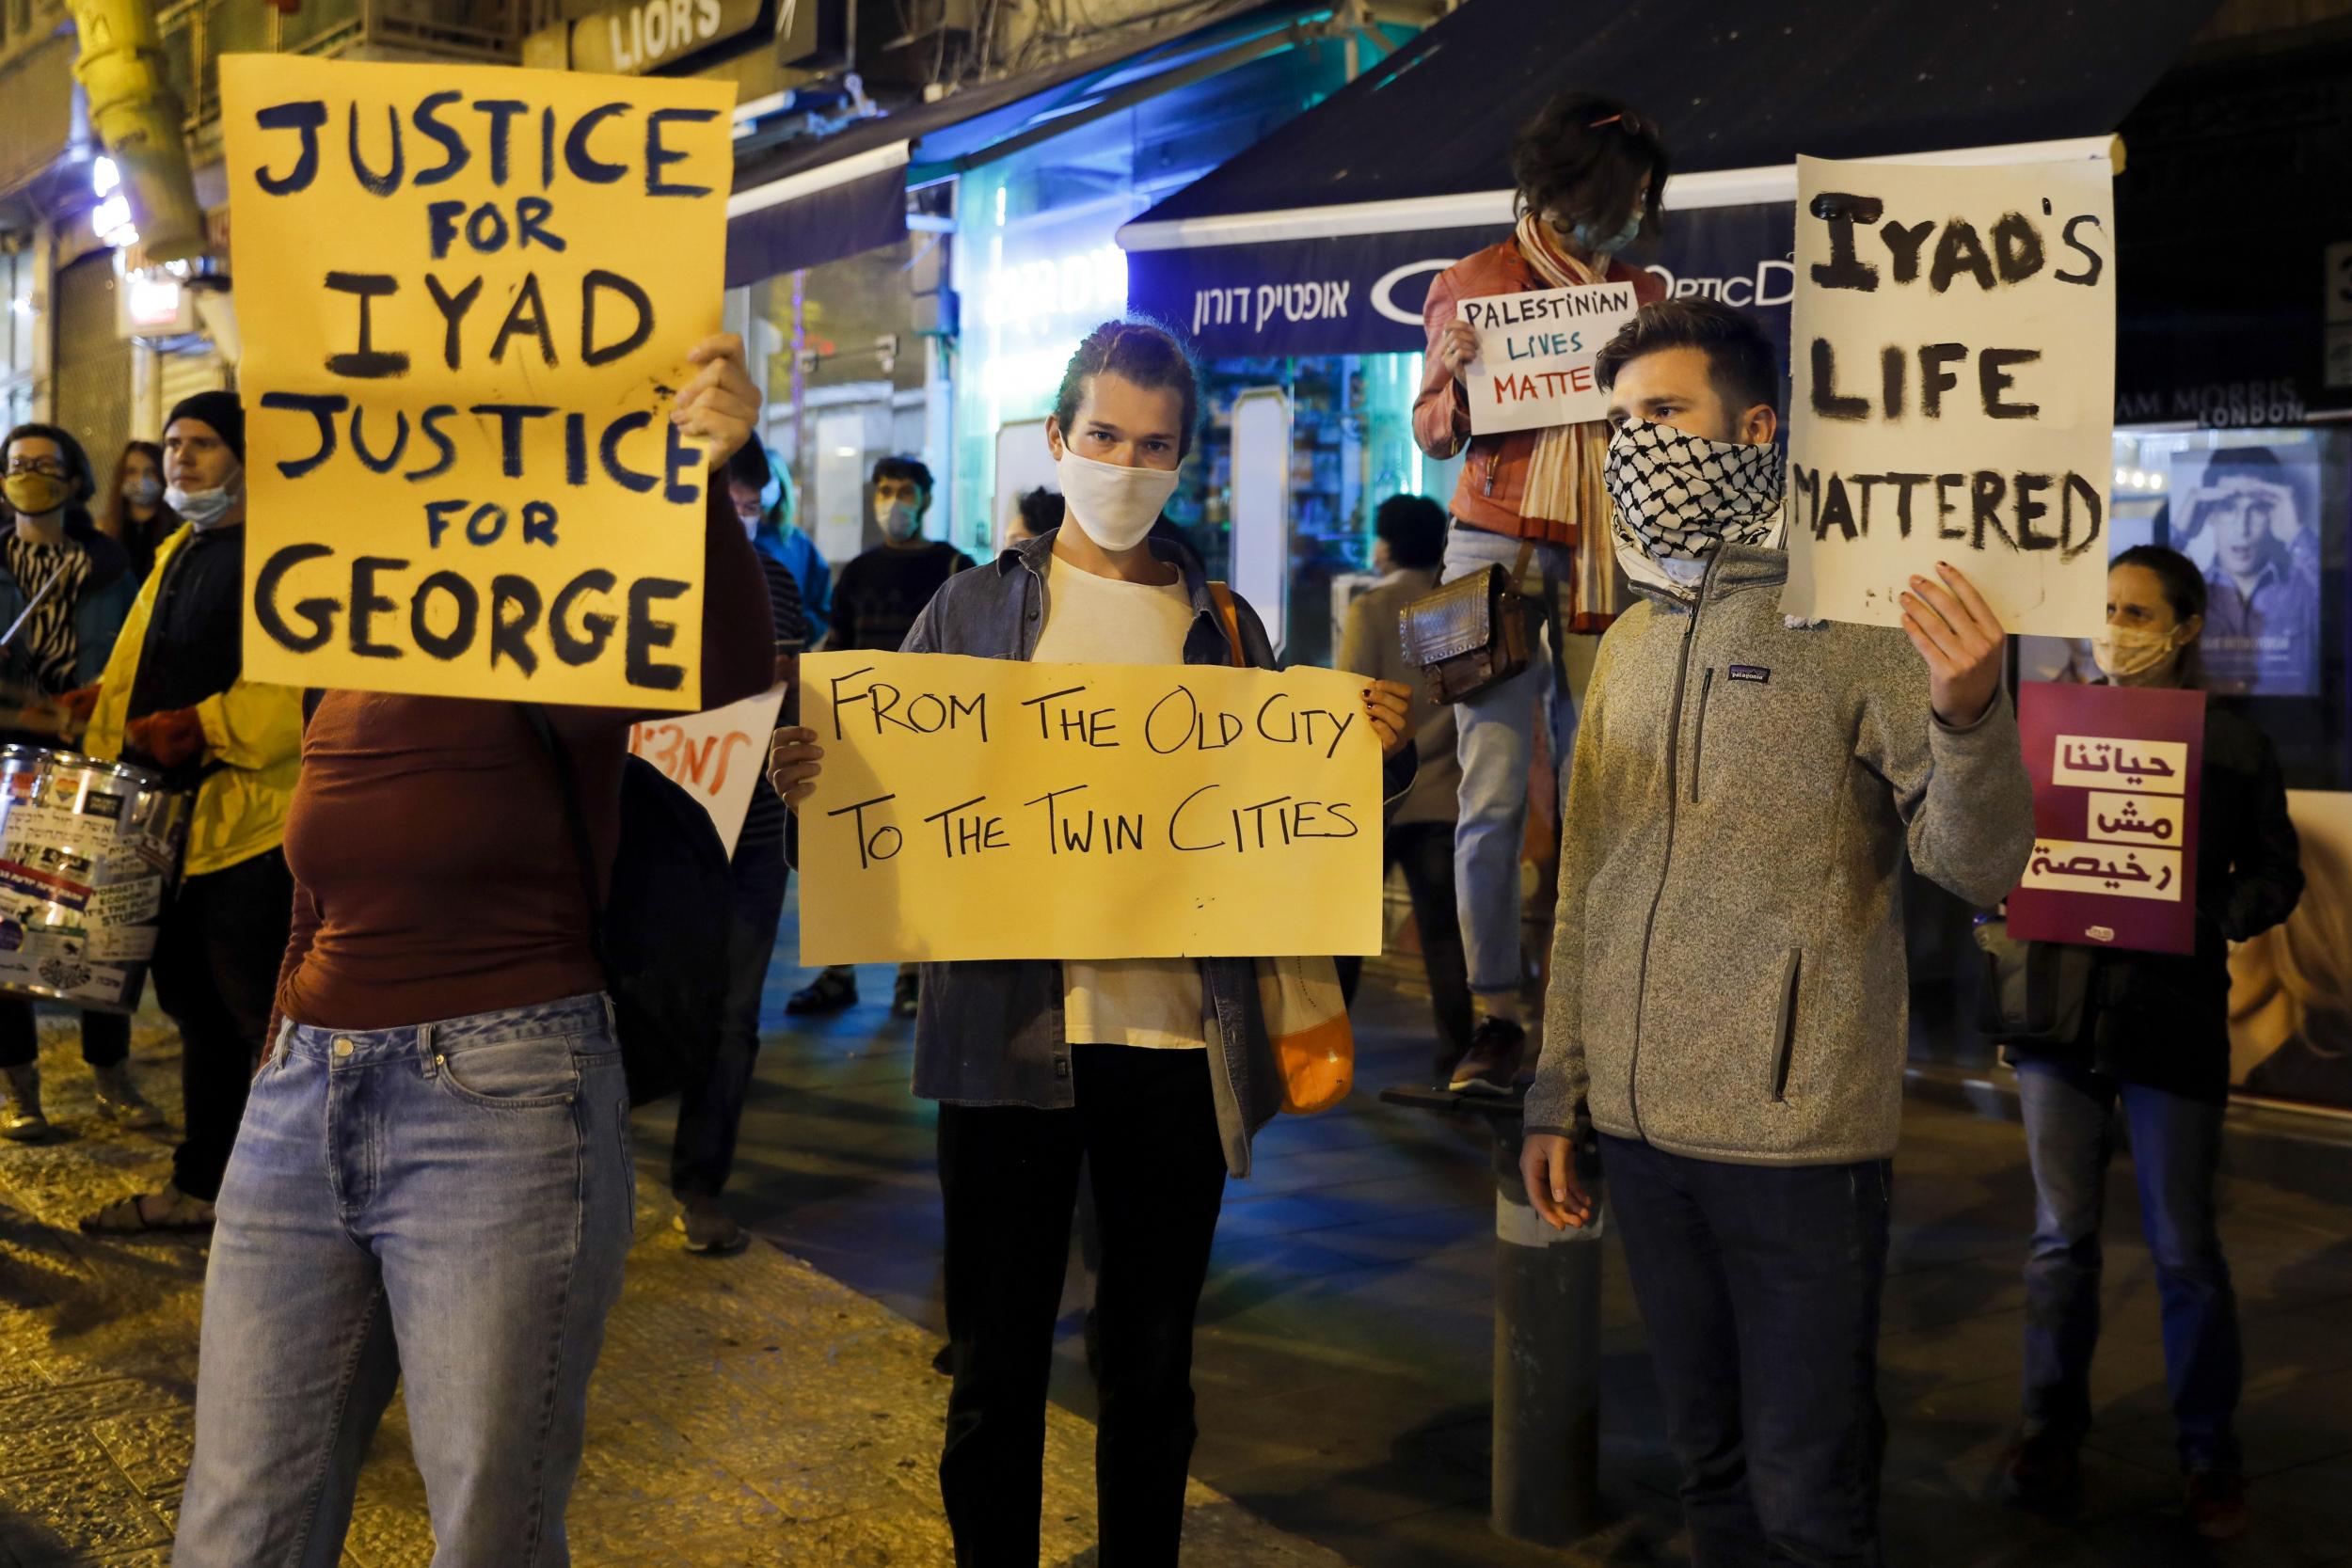 Israeli demonstrators carry placards during a demonstration condemning the shooting of Iyad Hallak, a disabled Palestinian man who was shot dead by Israeli police